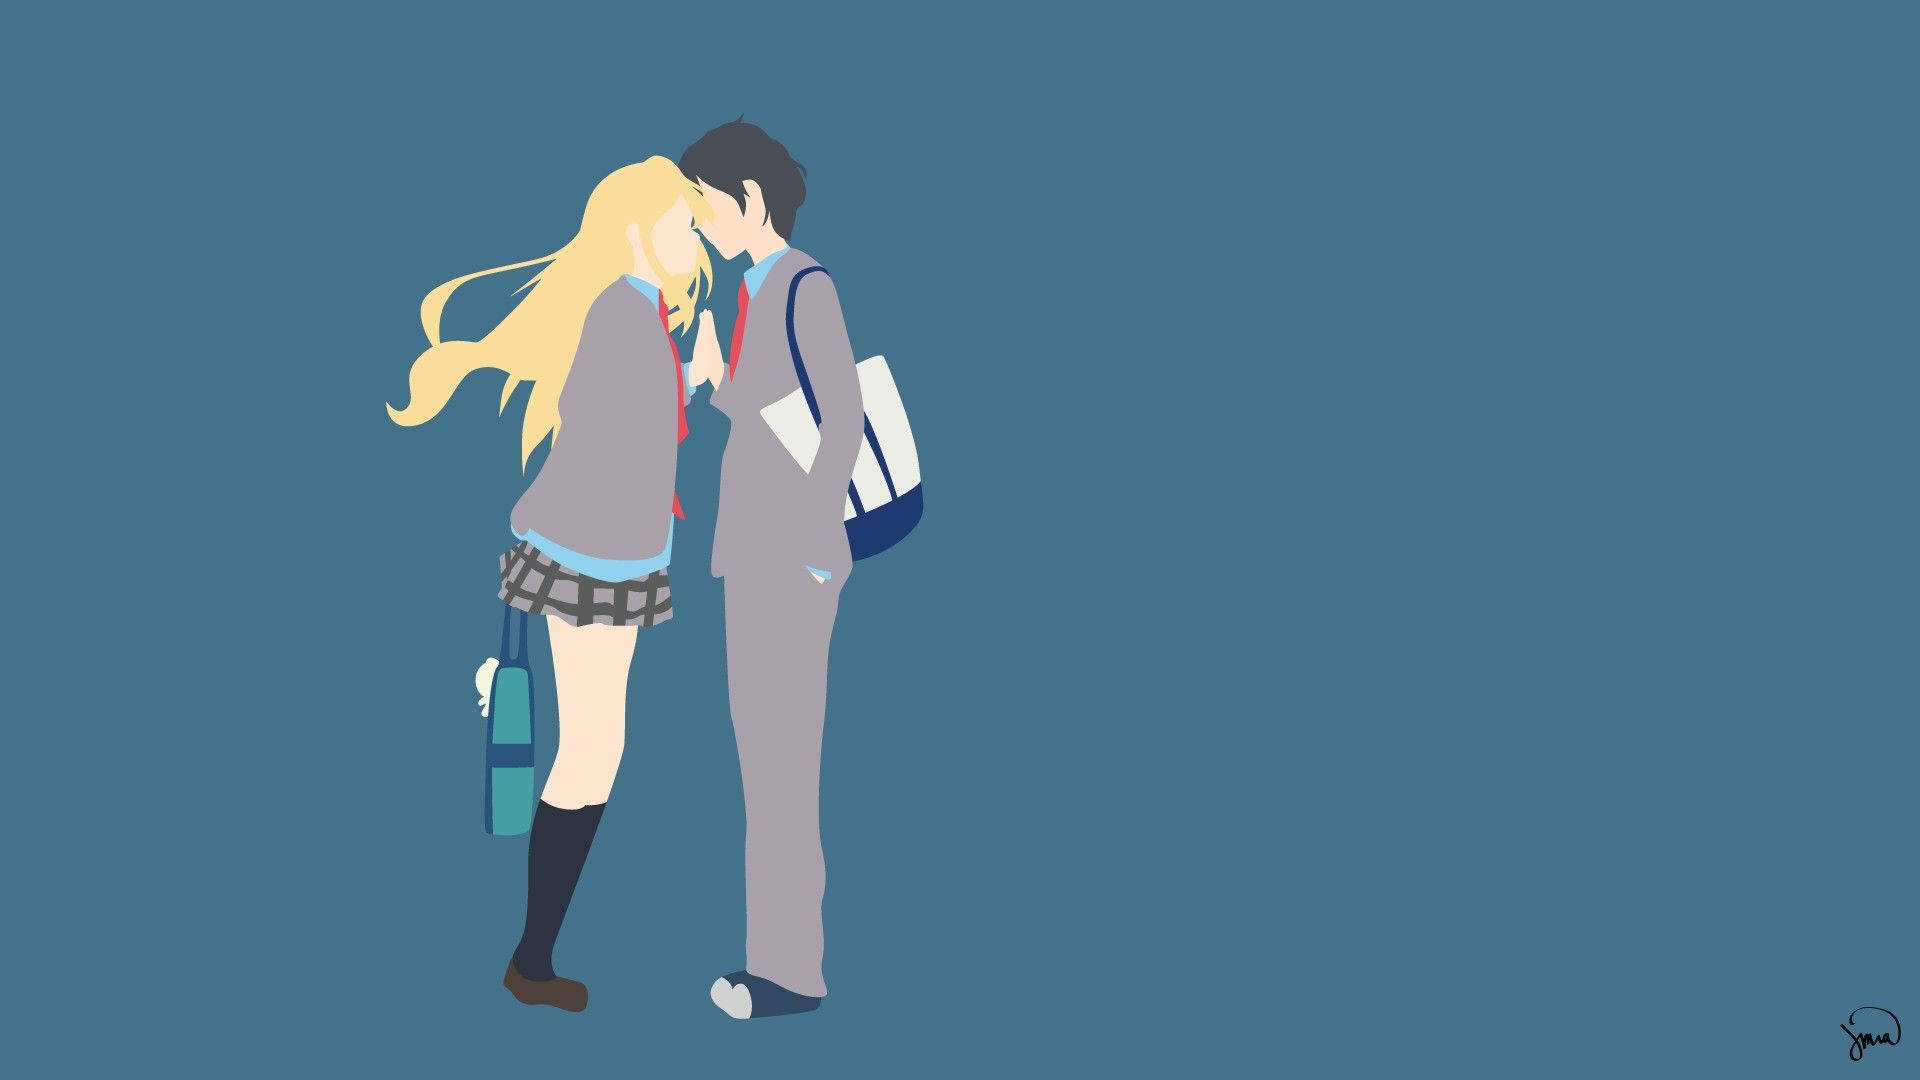 Kaori and Kousei together, united in their love of music Wallpaper